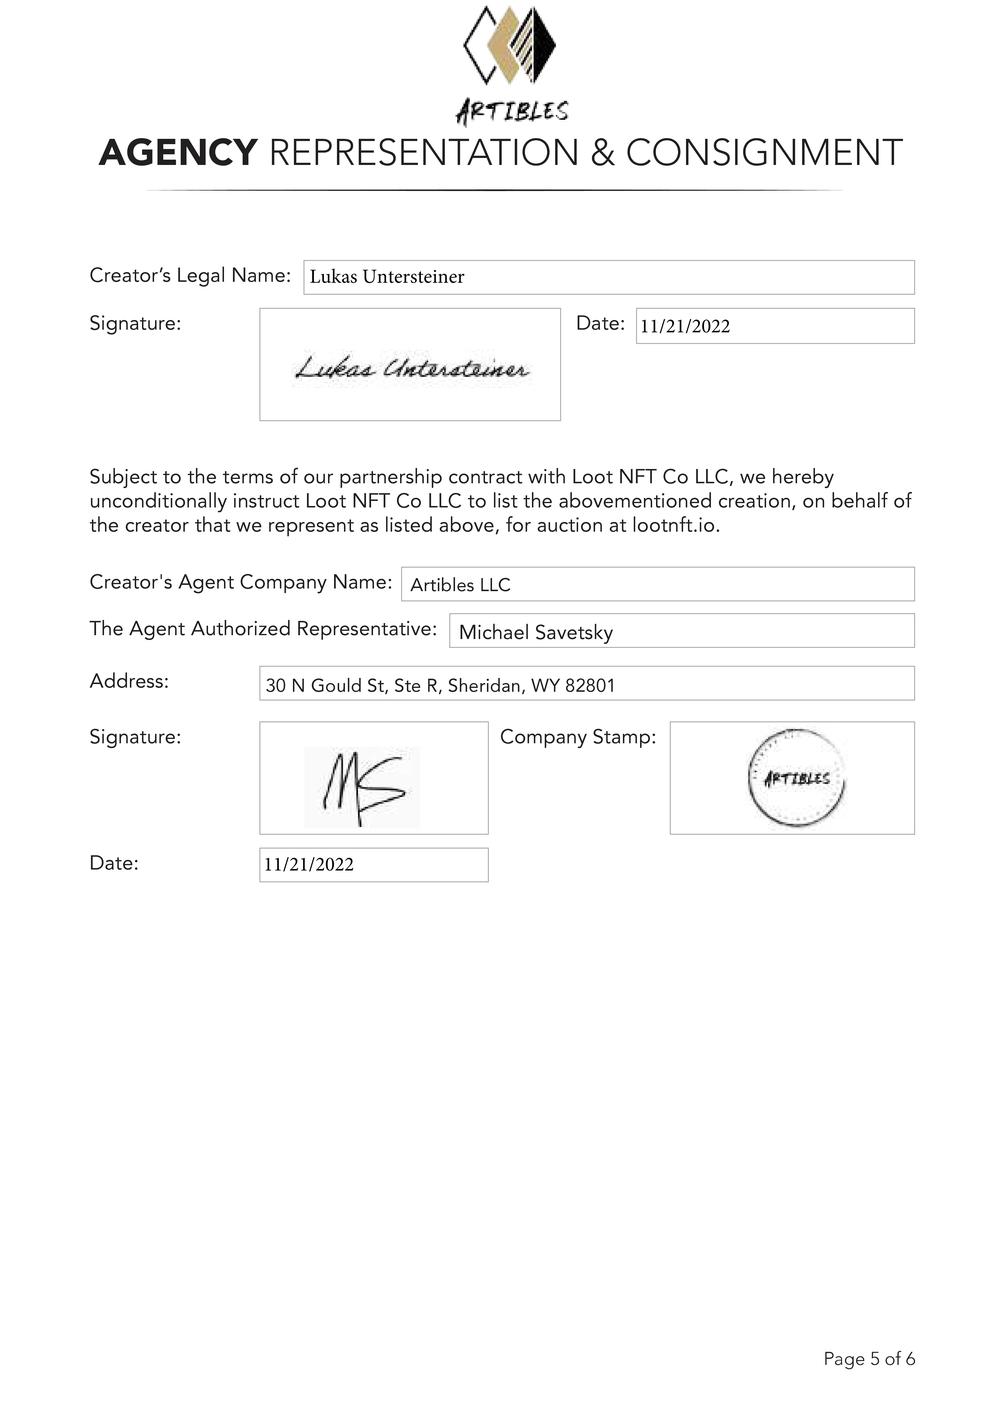 Certificate of Authenticity and Consignment - Stars.pdf